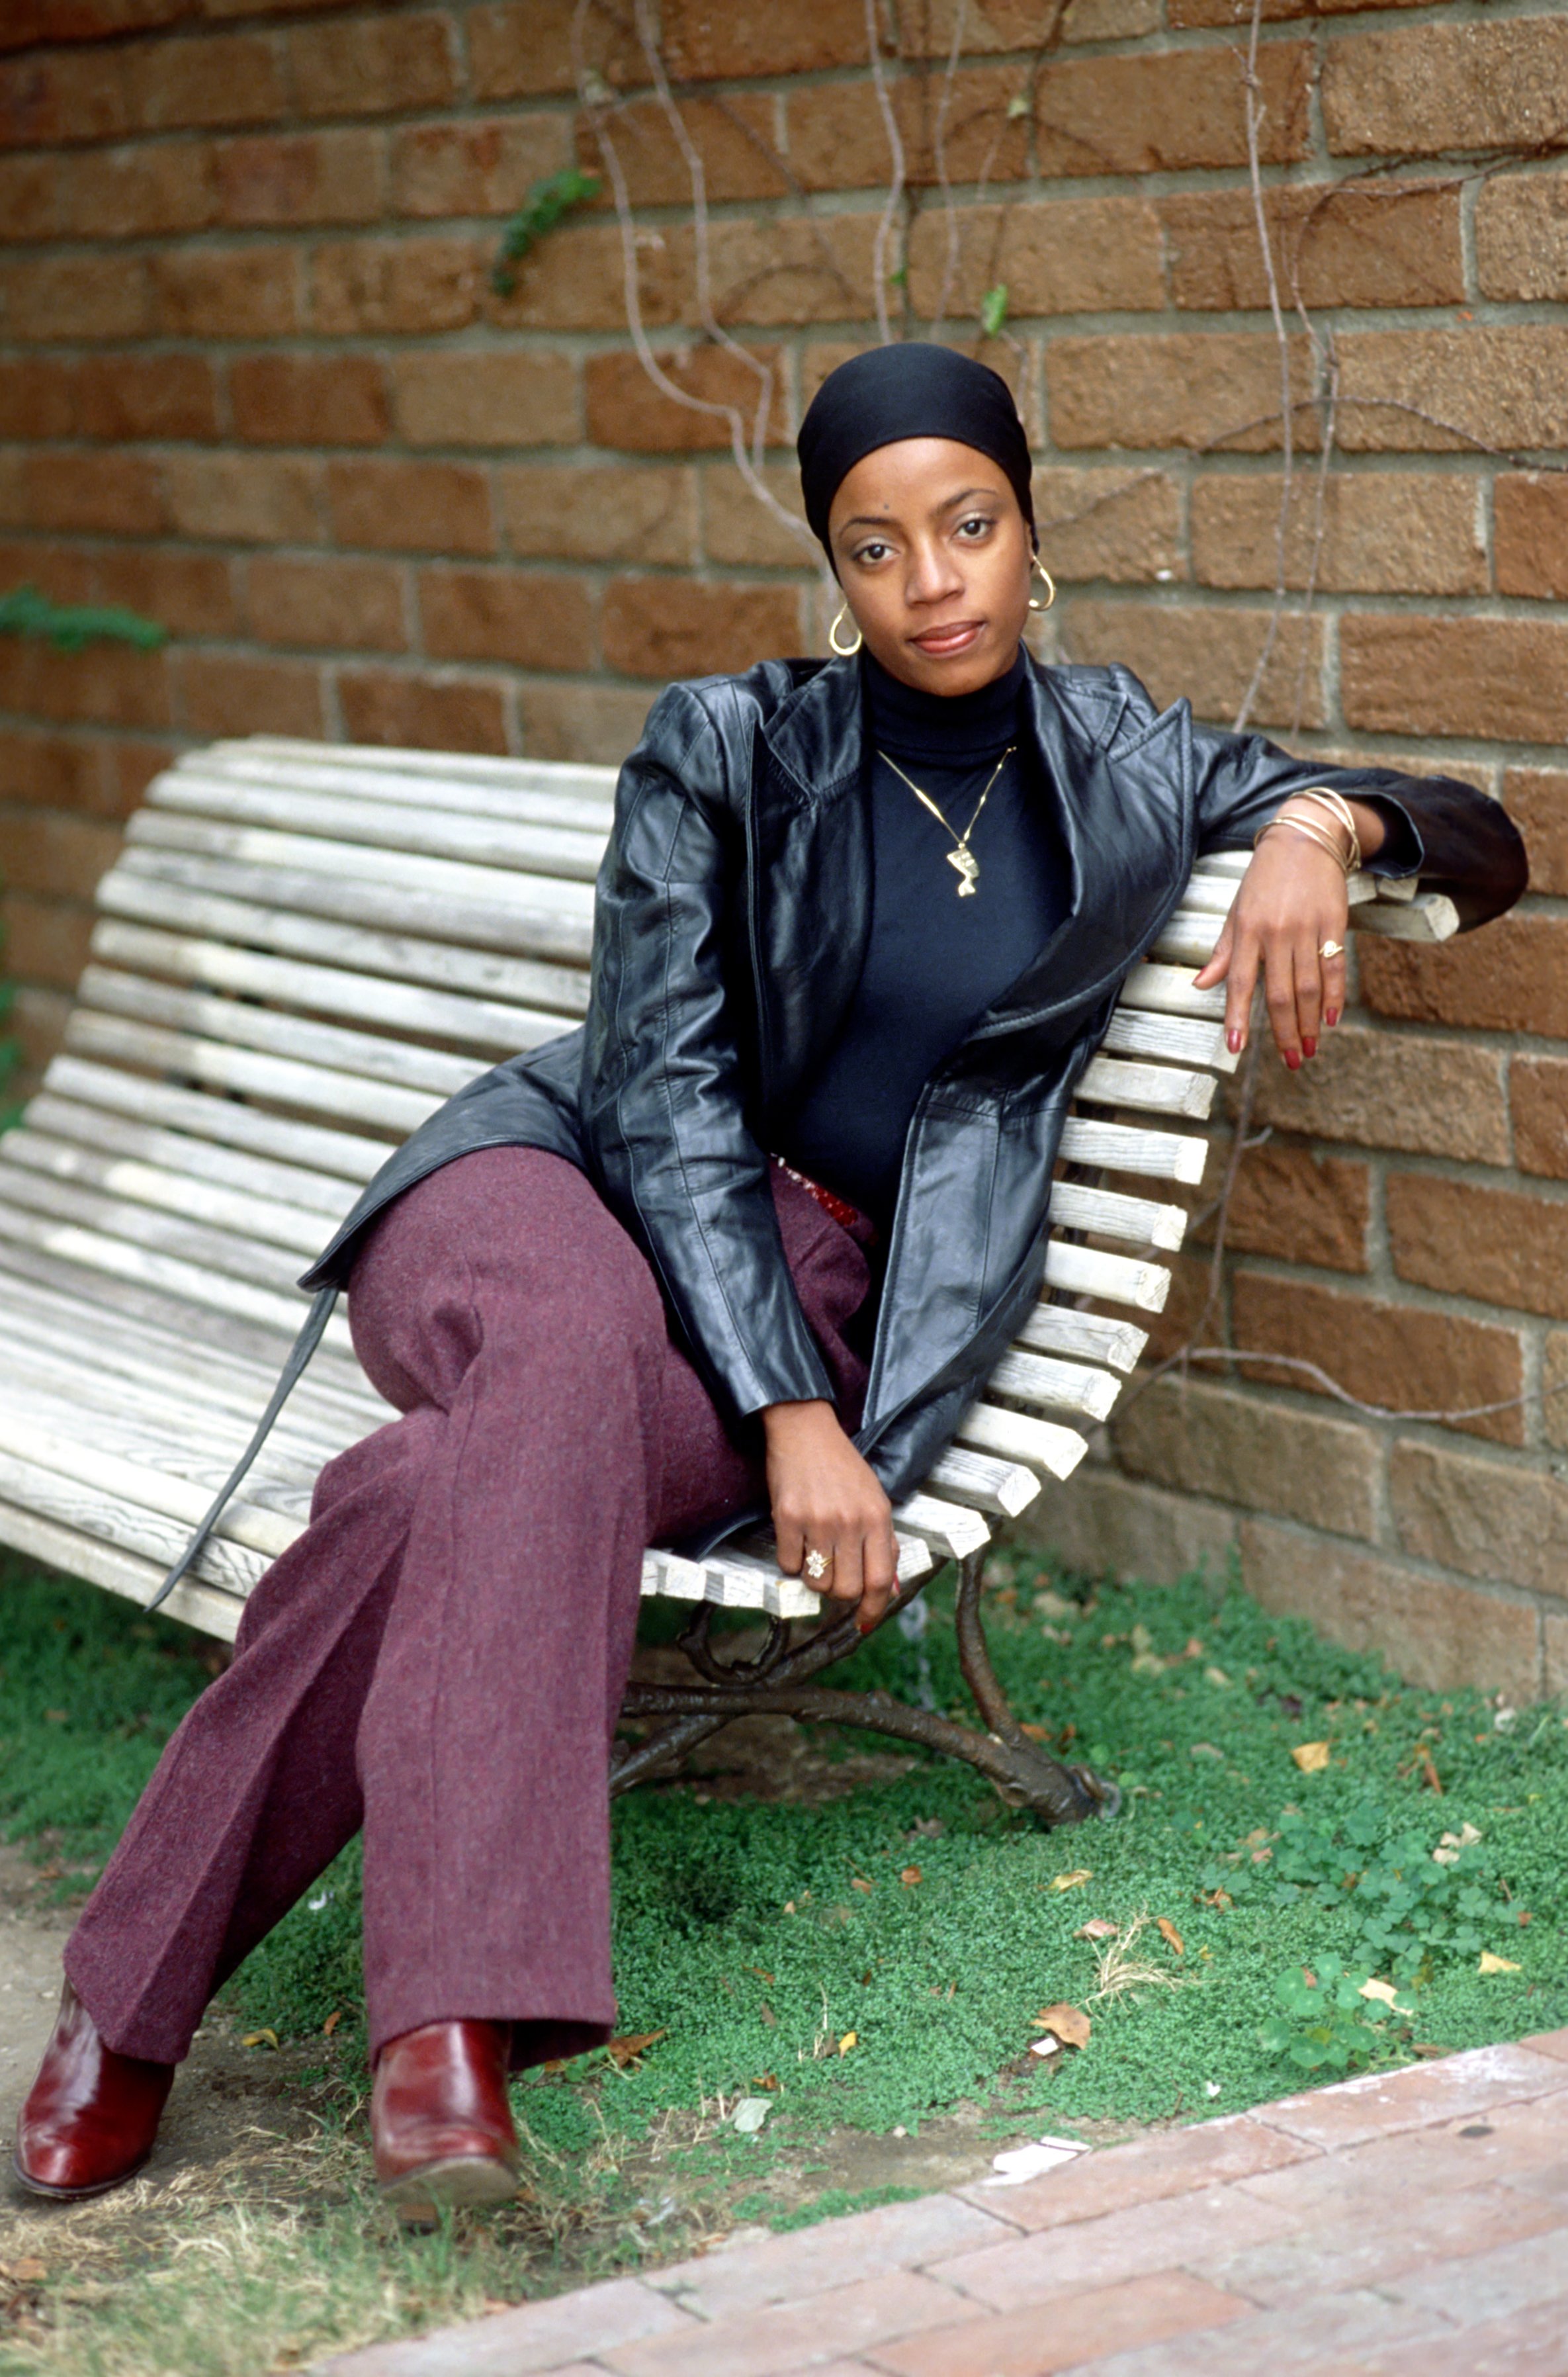 Author BernNadette Stanis posing for a portrait in February 1975 in Los Angeles, California. / Source: Getty Images